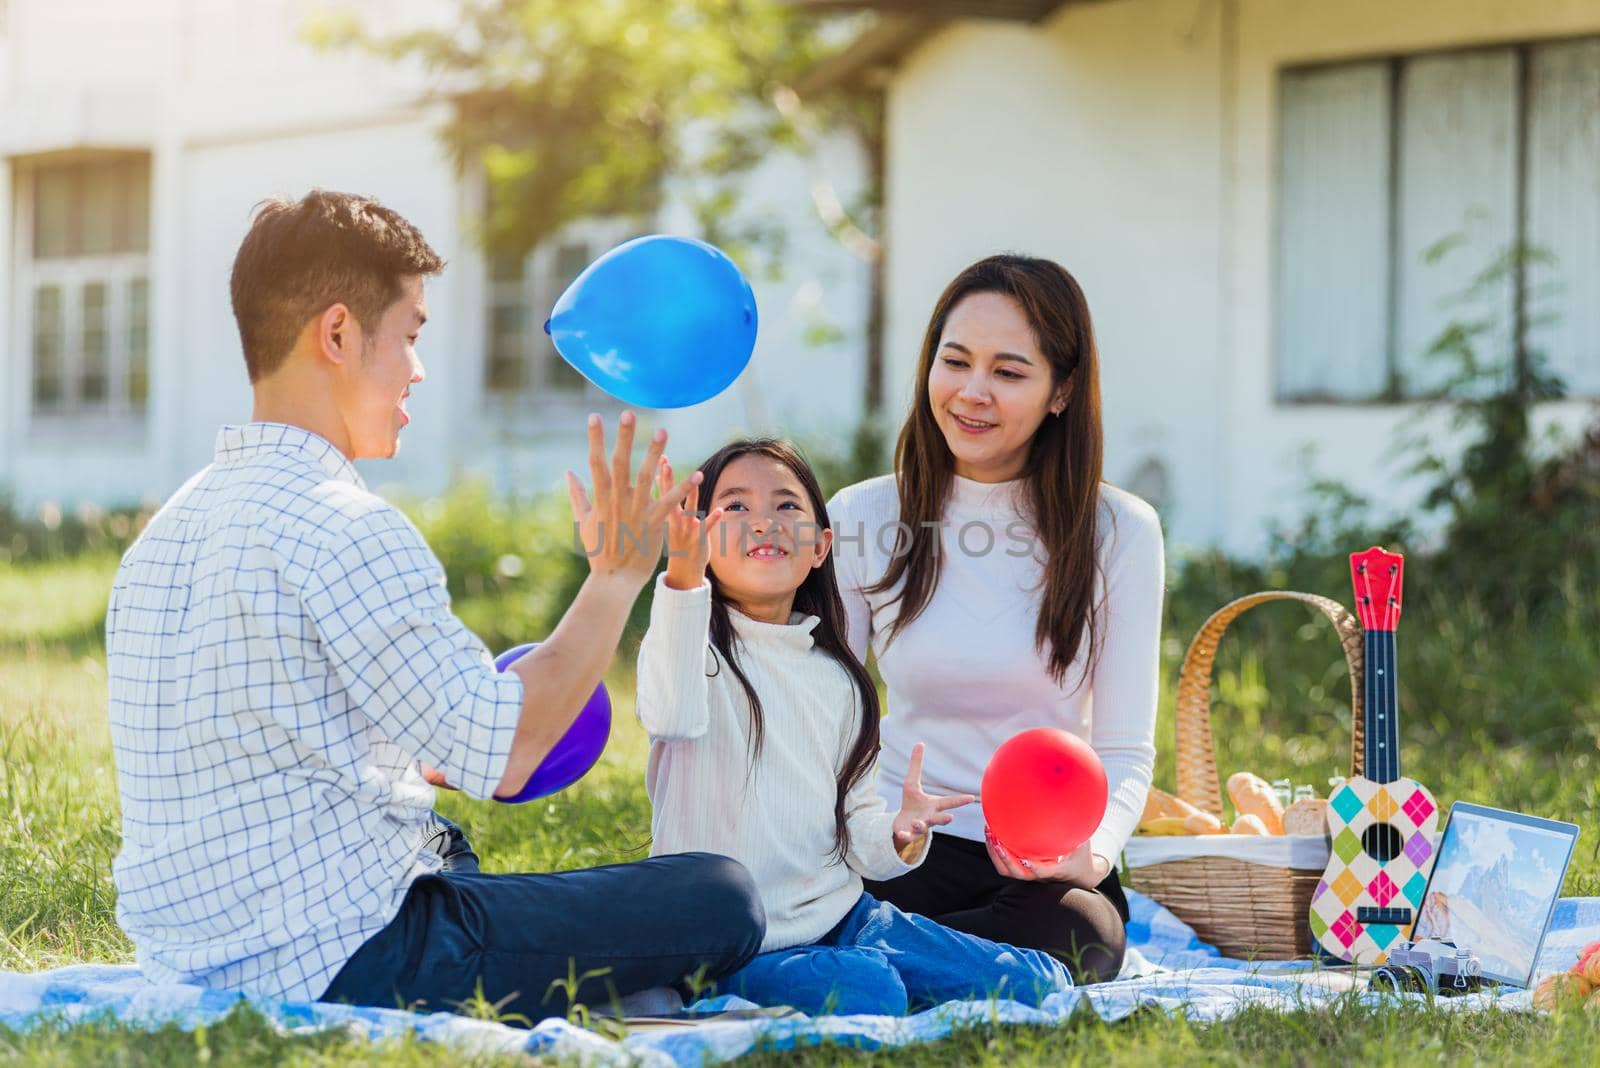 Happy family having fun outdoor sitting on picnic blanket playing balloons by Sorapop